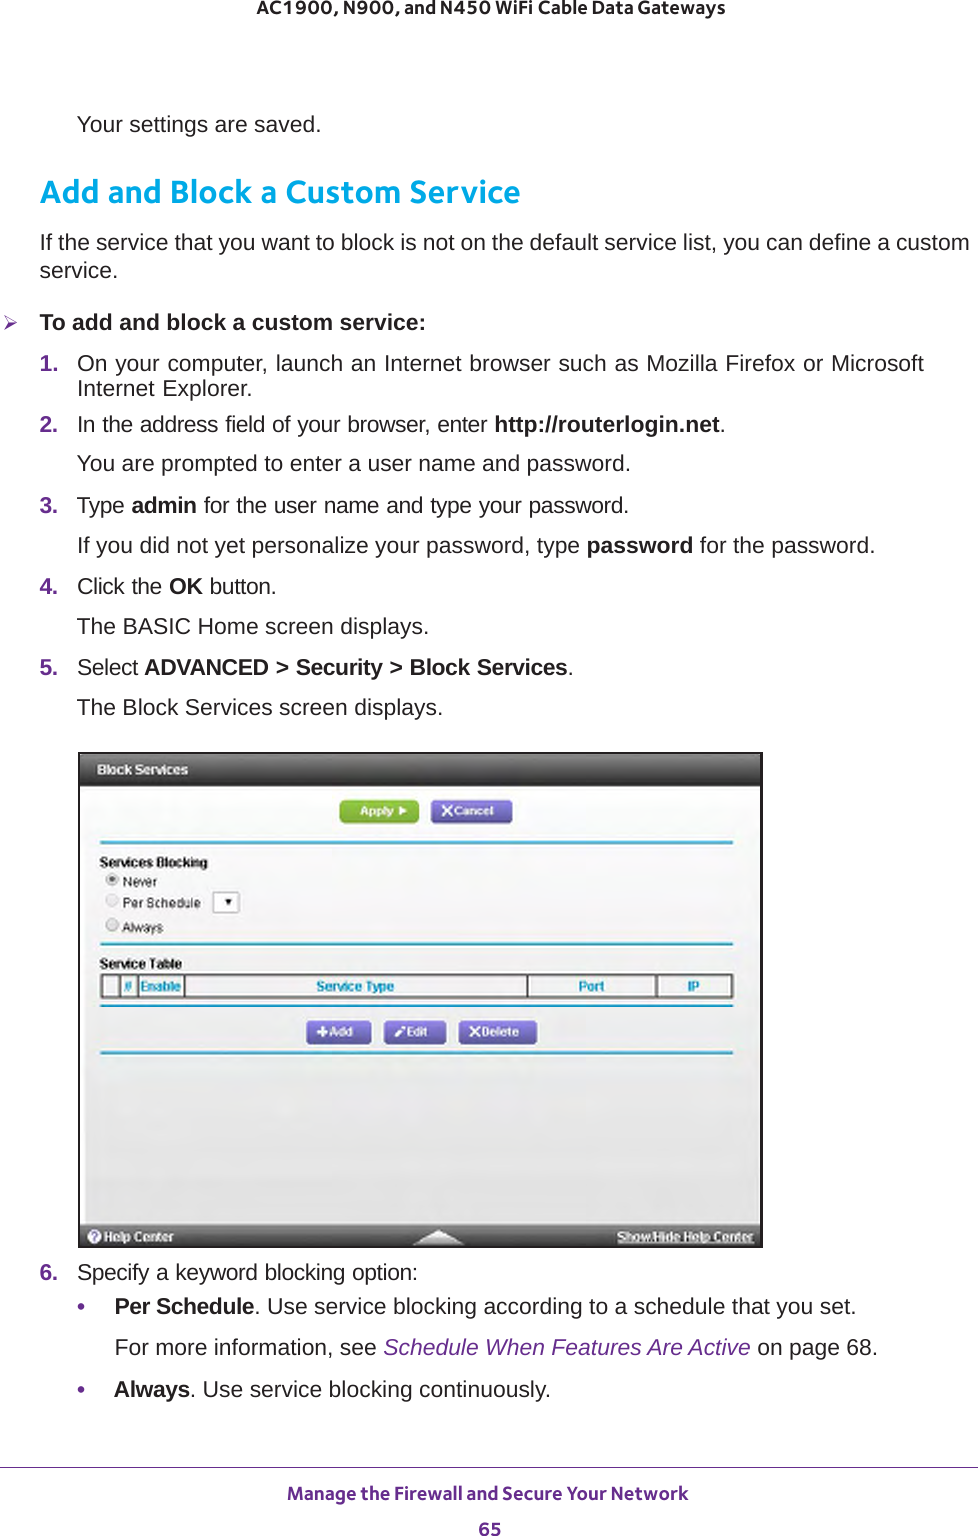 Manage the Firewall and Secure Your Network 65 AC1900, N900, and N450 WiFi Cable Data GatewaysYour settings are saved.Add and Block a Custom ServiceIf the service that you want to block is not on the default service list, you can define a custom service.To add and block a custom service:1.  On your computer, launch an Internet browser such as Mozilla Firefox or Microsoft Internet Explorer. 2.  In the address field of your browser, enter http://routerlogin.net.You are prompted to enter a user name and password.3.  Type admin for the user name and type your password.If you did not yet personalize your password, type password for the password.4.  Click the OK button. The BASIC Home screen displays.5.  Select ADVANCED &gt; Security &gt; Block Services.The Block Services screen displays.6.  Specify a keyword blocking option:•Per Schedule. Use service blocking according to a schedule that you set.For more information, see Schedule When Features Are Active on page  68.•Always. Use service blocking continuously.